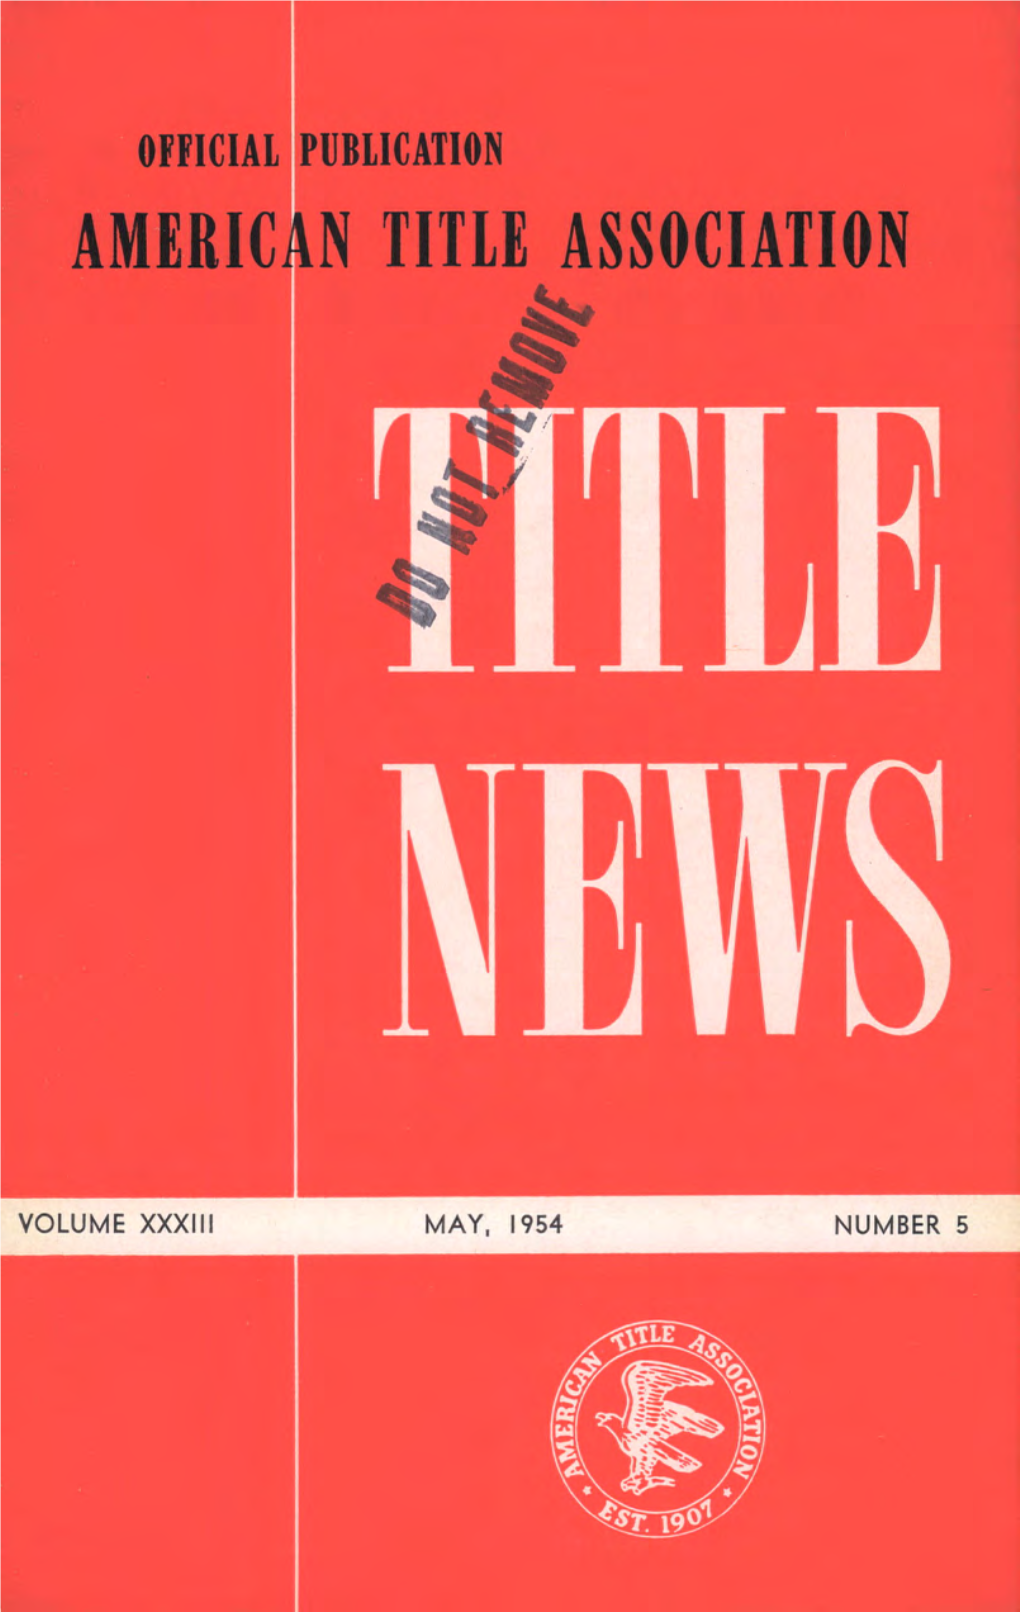 MAY, 1954 NUMBER 5 Table of Contents